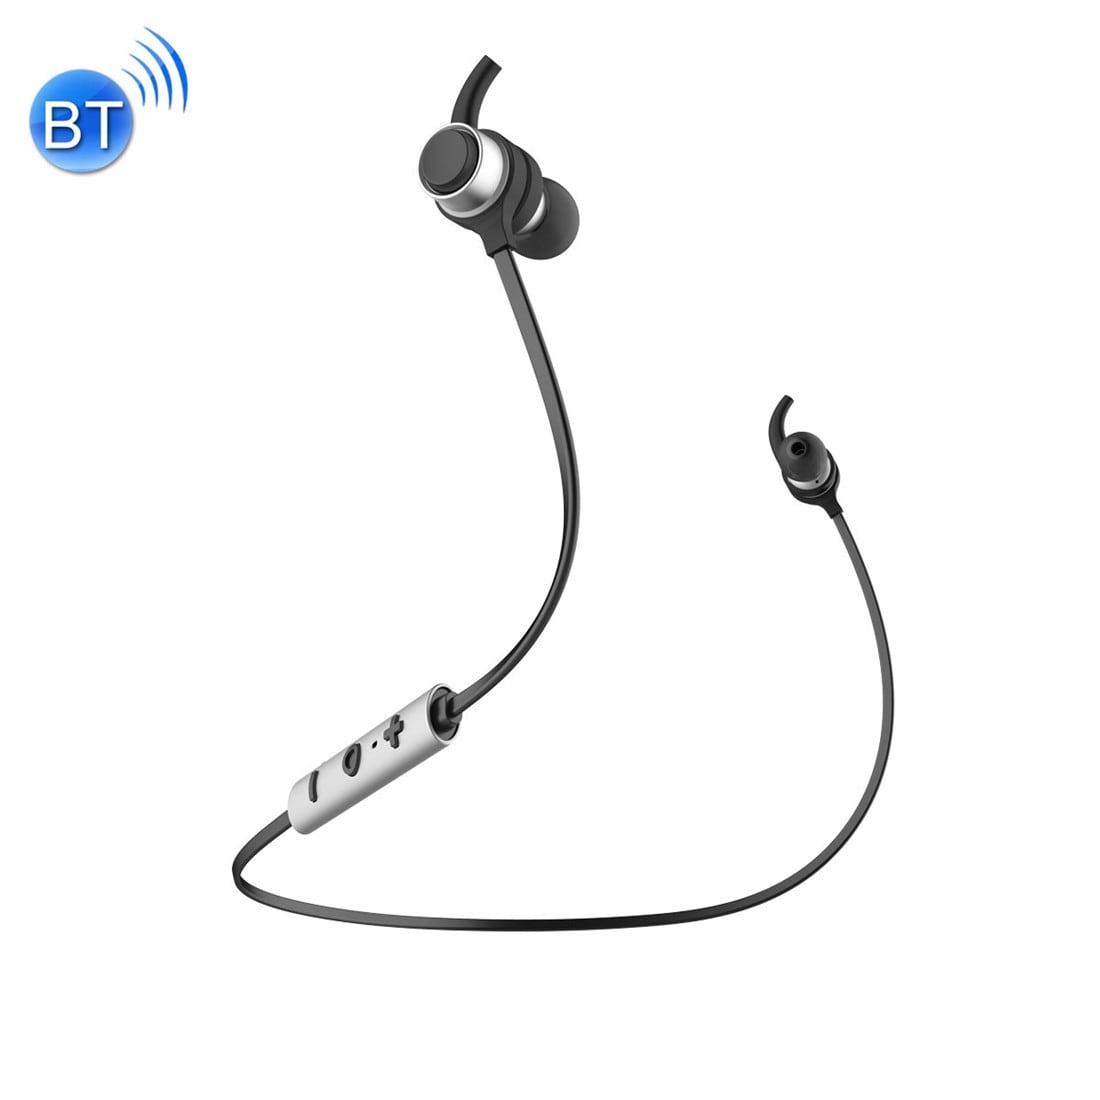 Bluetooth 4.1 Earphone In-ear iPhone & Android Smart Phone